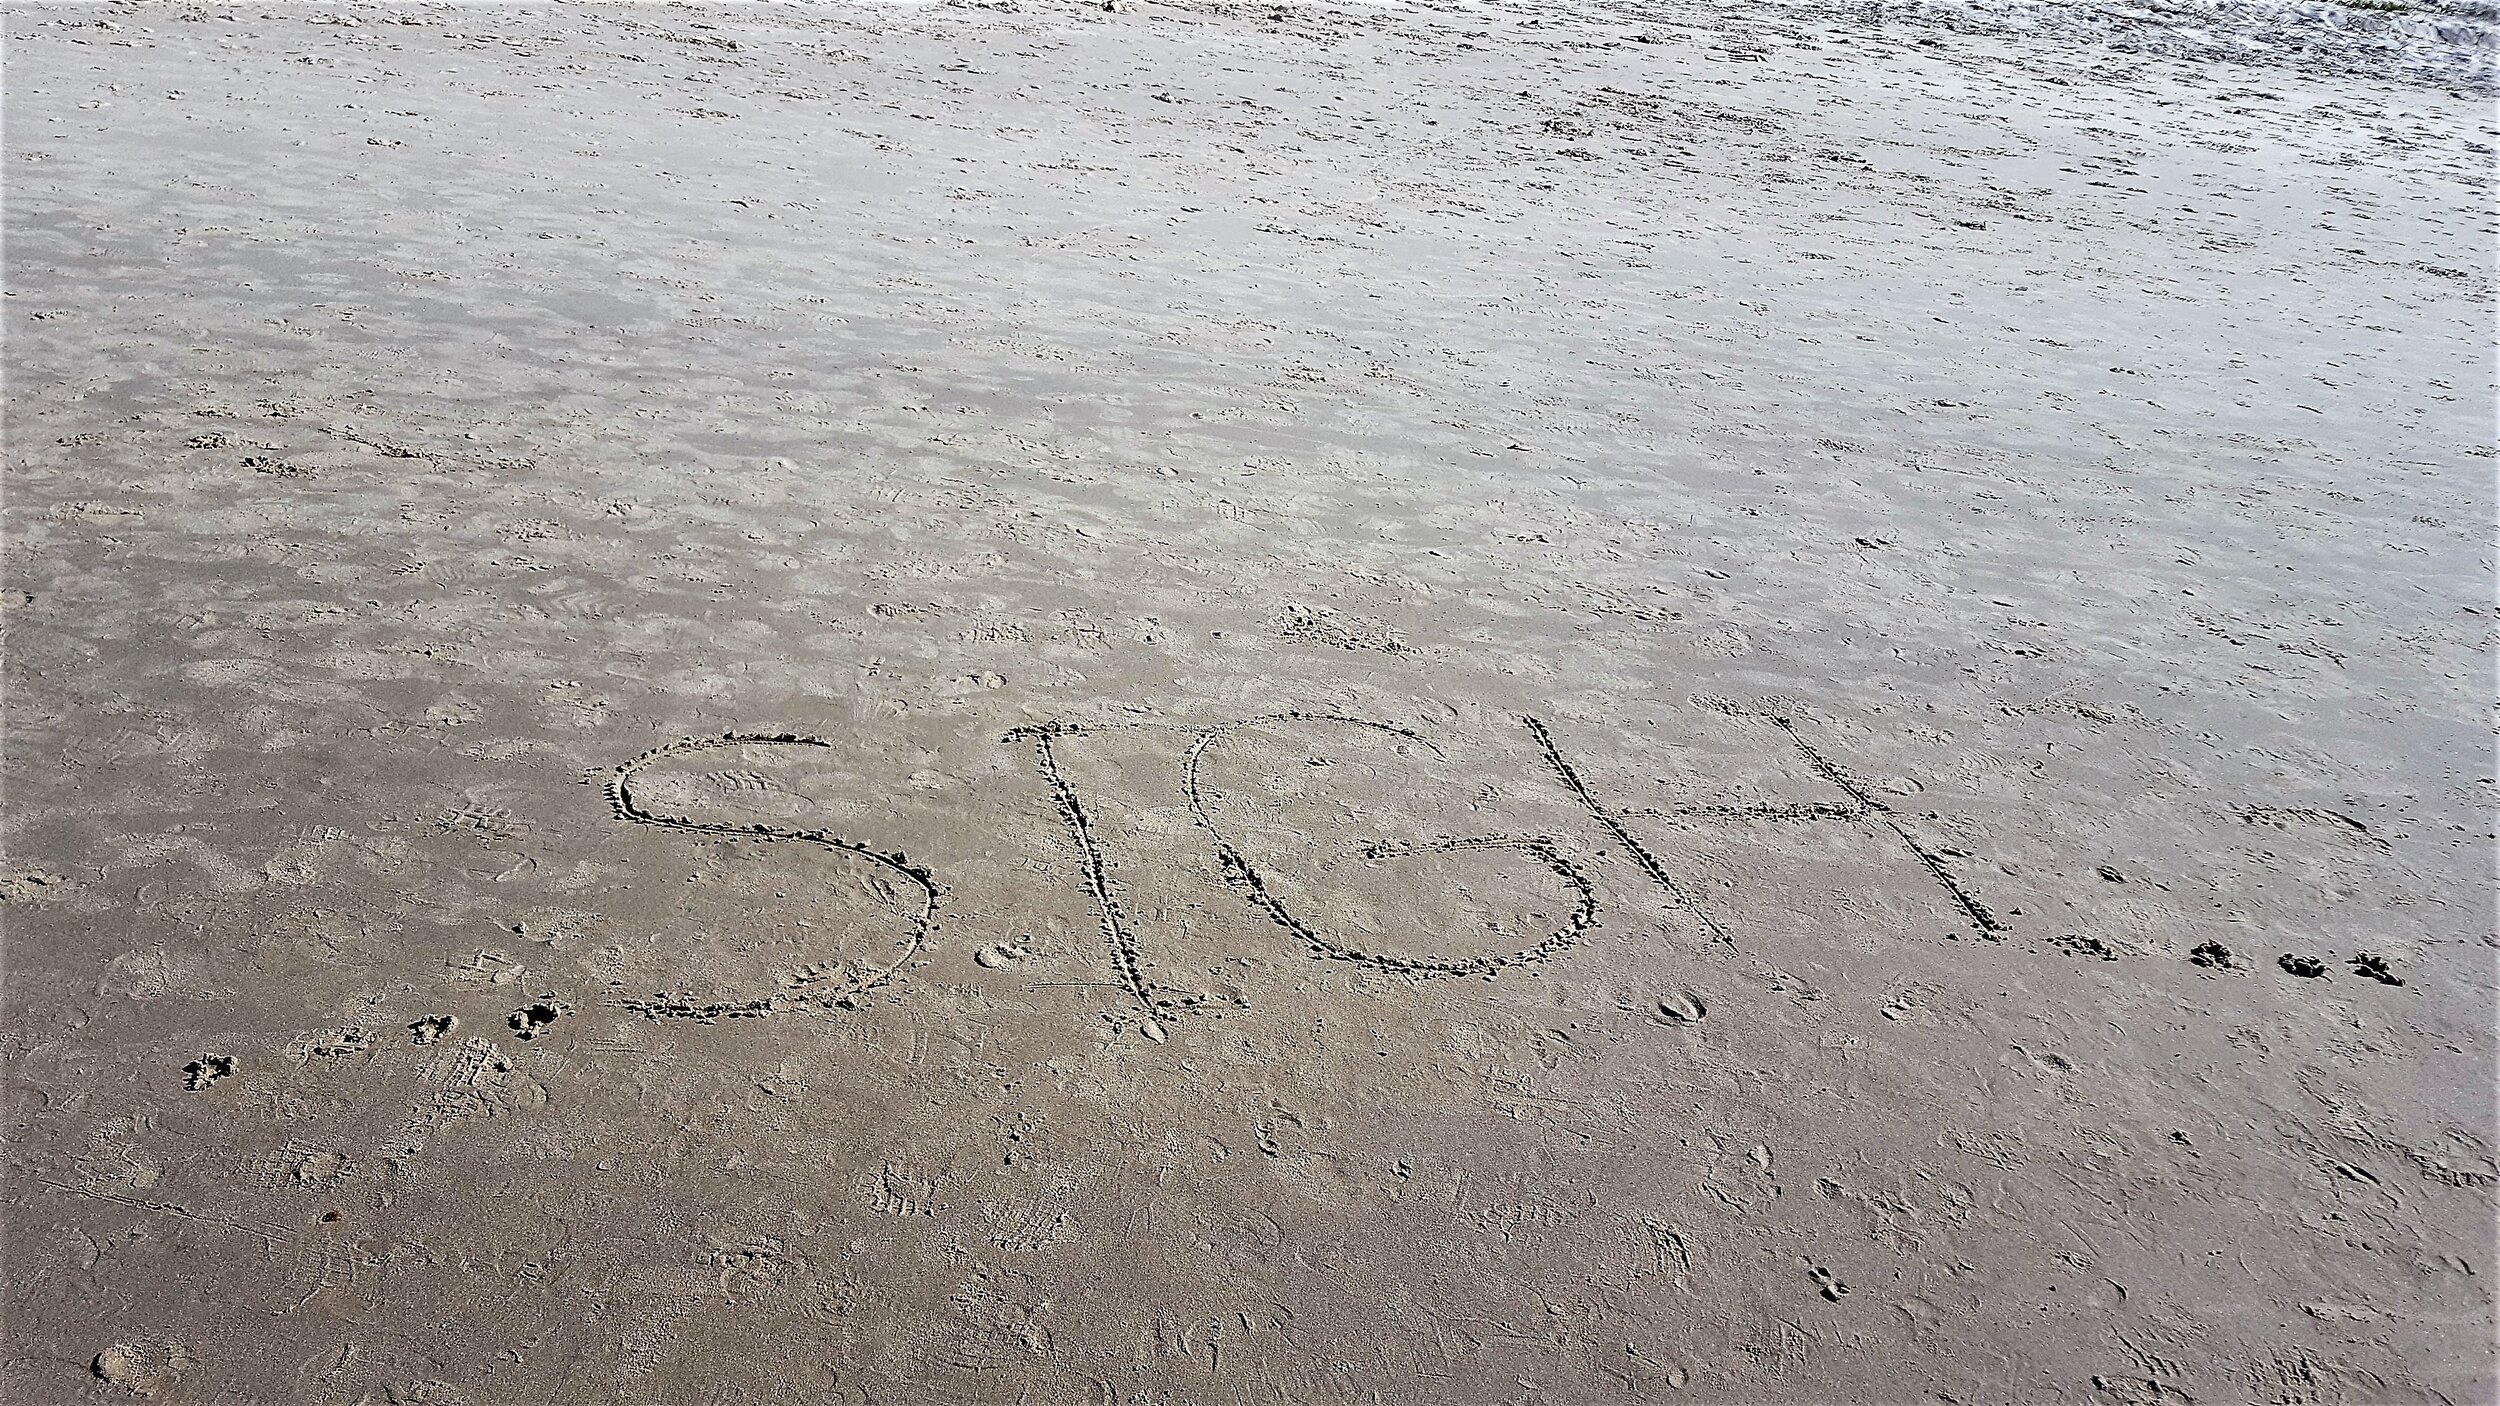 MESSAGE IN THE SAND